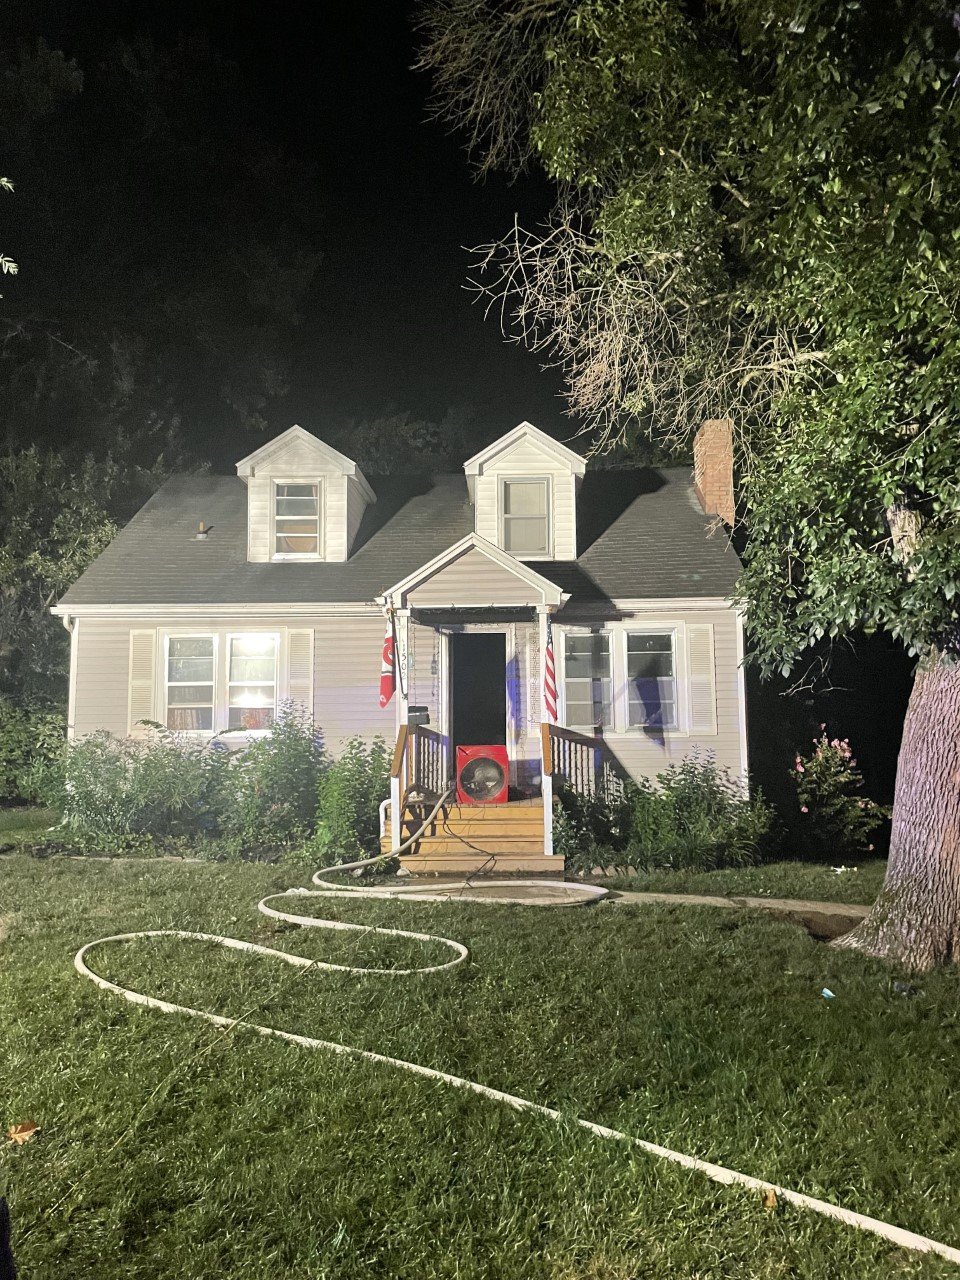 Firefighters responded to overnight house fire in the 1500 block of Forest Avenue in Fulton, Missouri on Friday, July 29, 2022. The Fulton Fire Department estimates the fire caused $50,000 in damage to the home. 